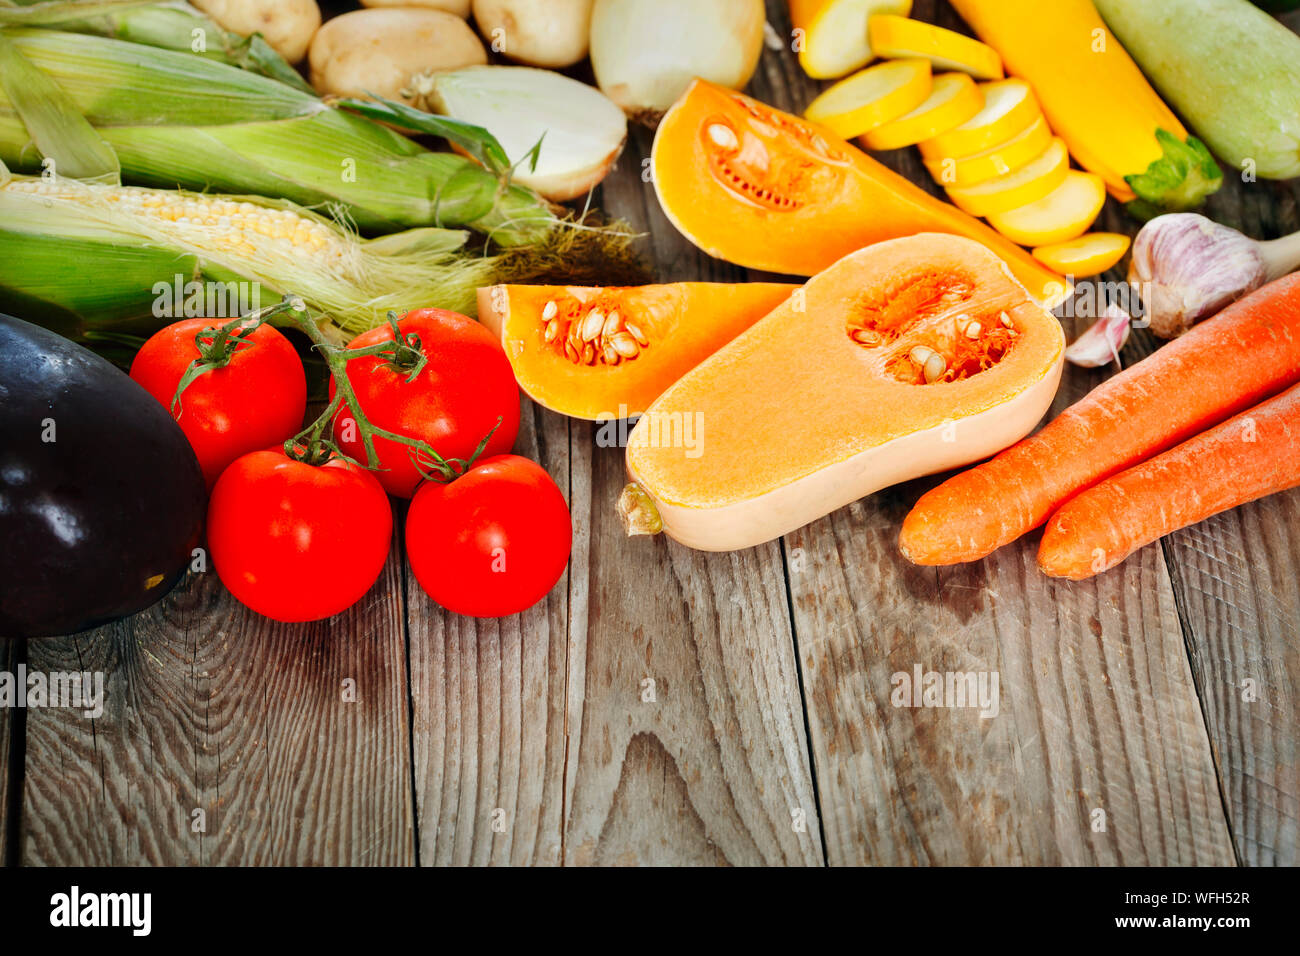 Arrangement of various fruit and vegetables on a wooden table Stock Photo